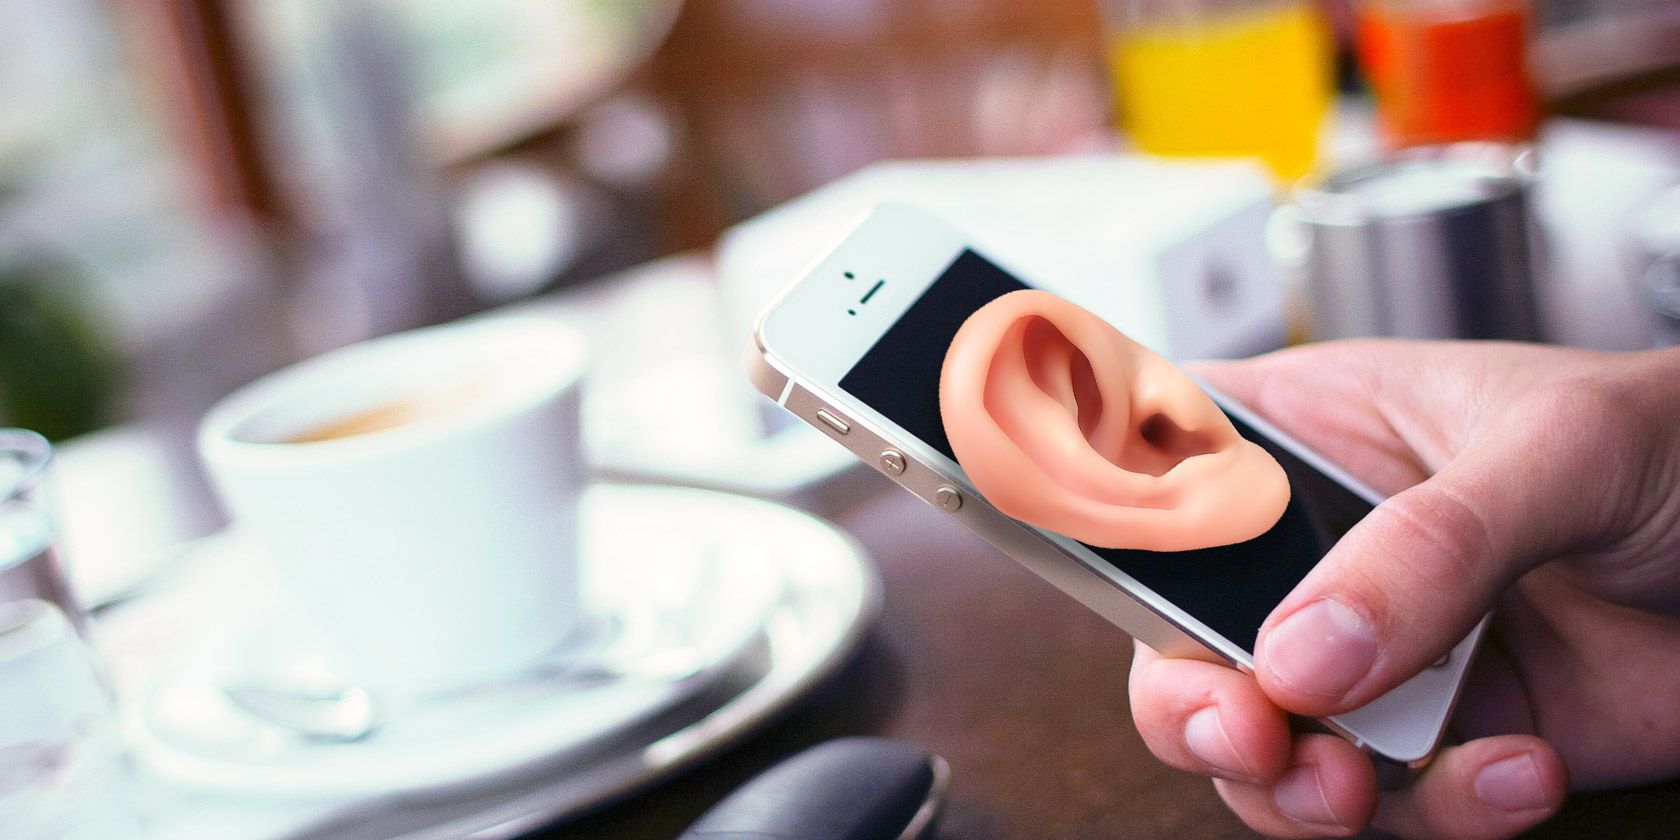 Is Your Smartphone REALLY Listening In?